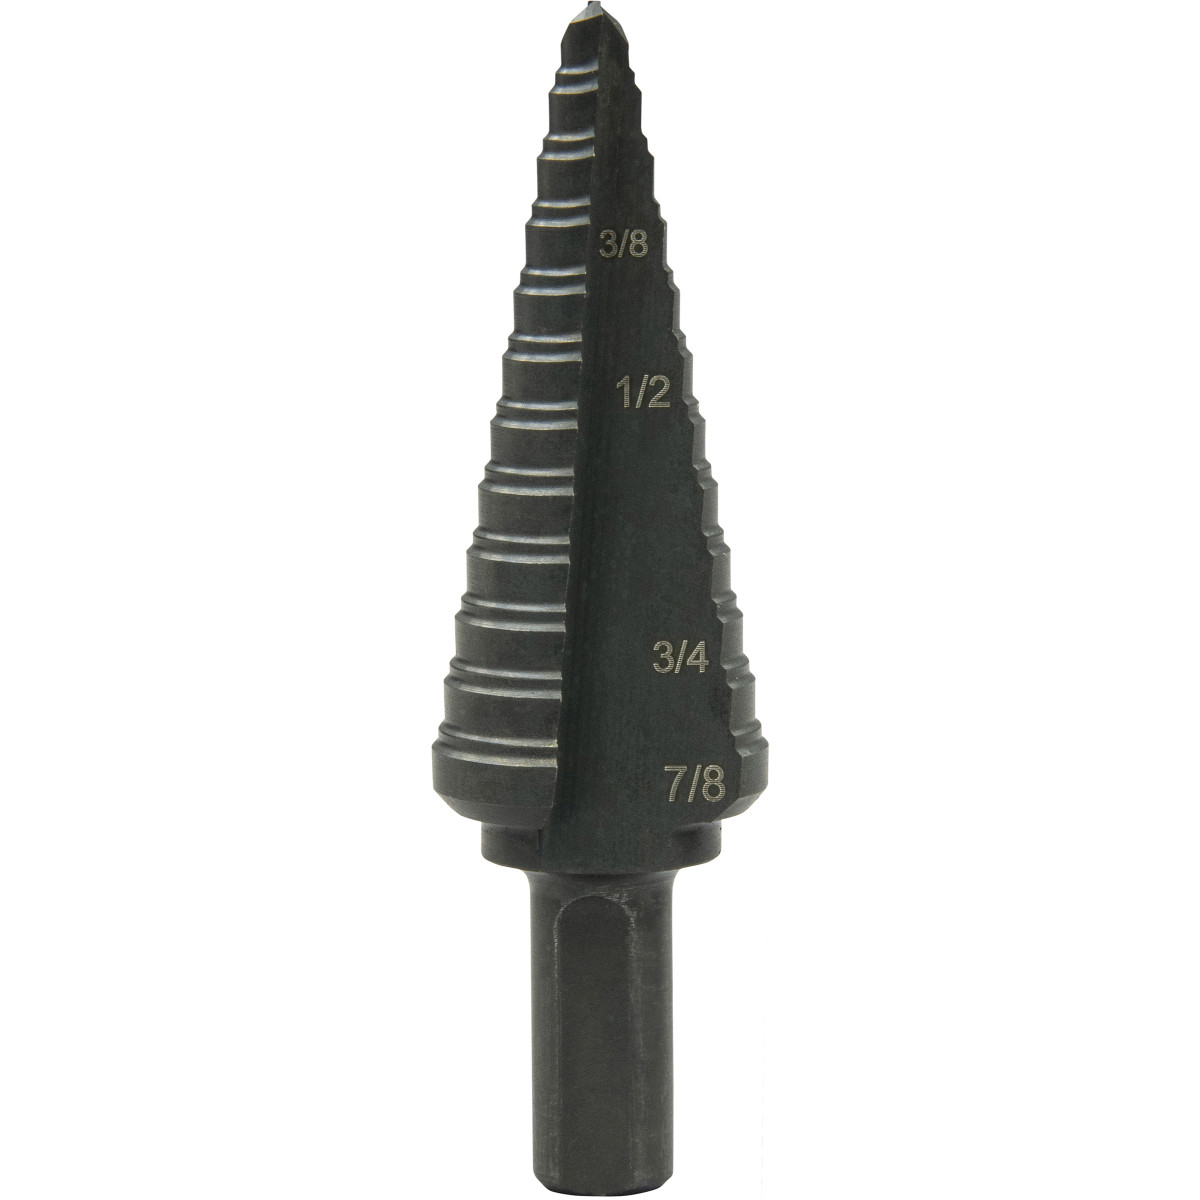 HSS Cobalt Hex Shank Step Cone Drill Bit Hole Saw Cutter Tackle Tool 3 type 